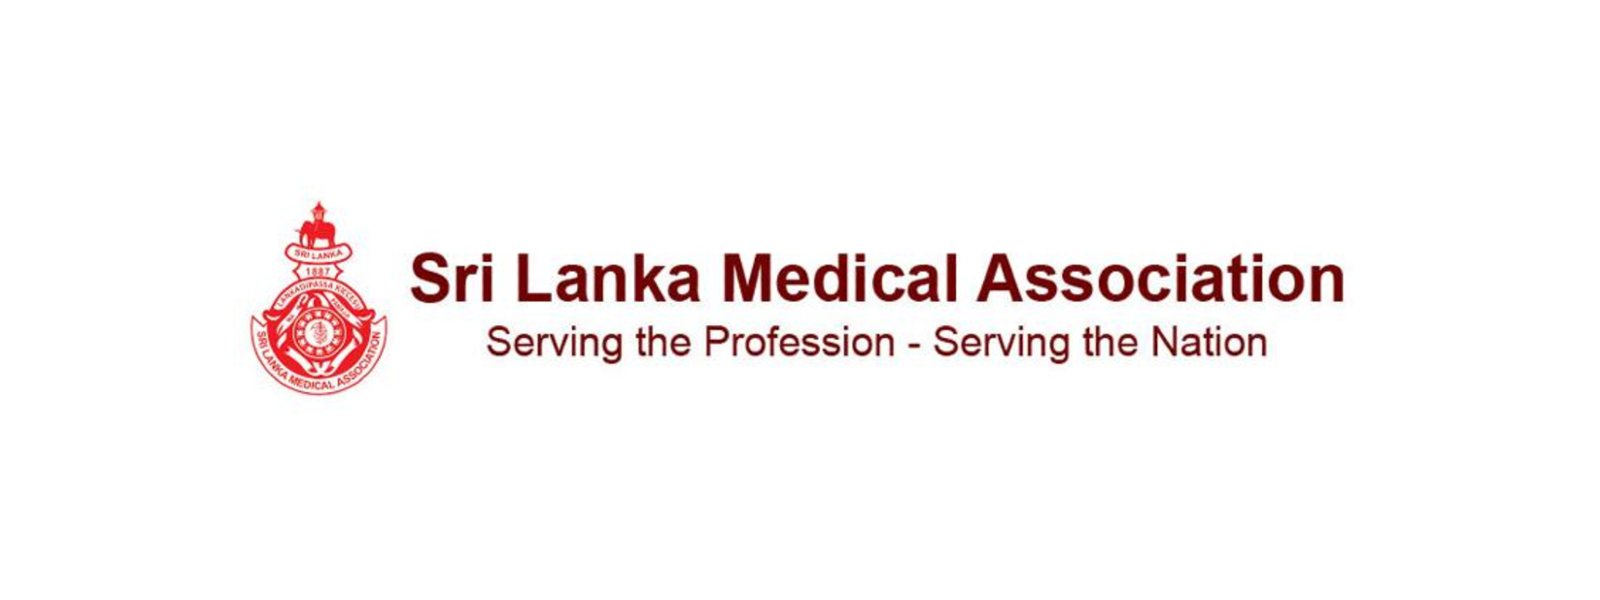 SLMA appeals for strict COVID-19 control measures